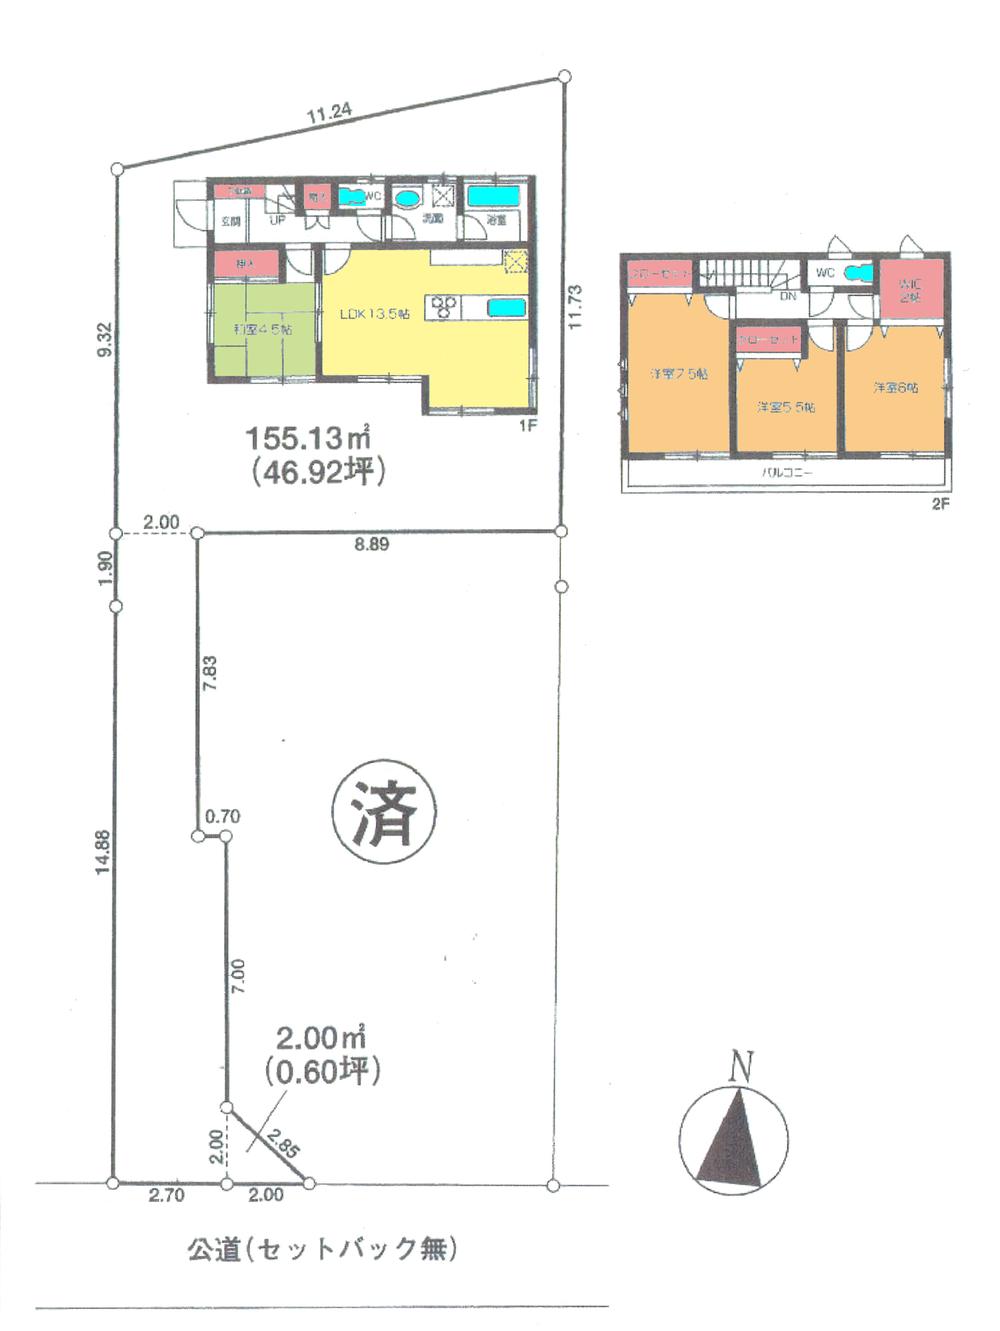 Compartment view + building plan example. Building plan example, Land price 24.5 million yen, Land area 155.13 sq m reference plan is possible architecture at 12.4 million yen. 